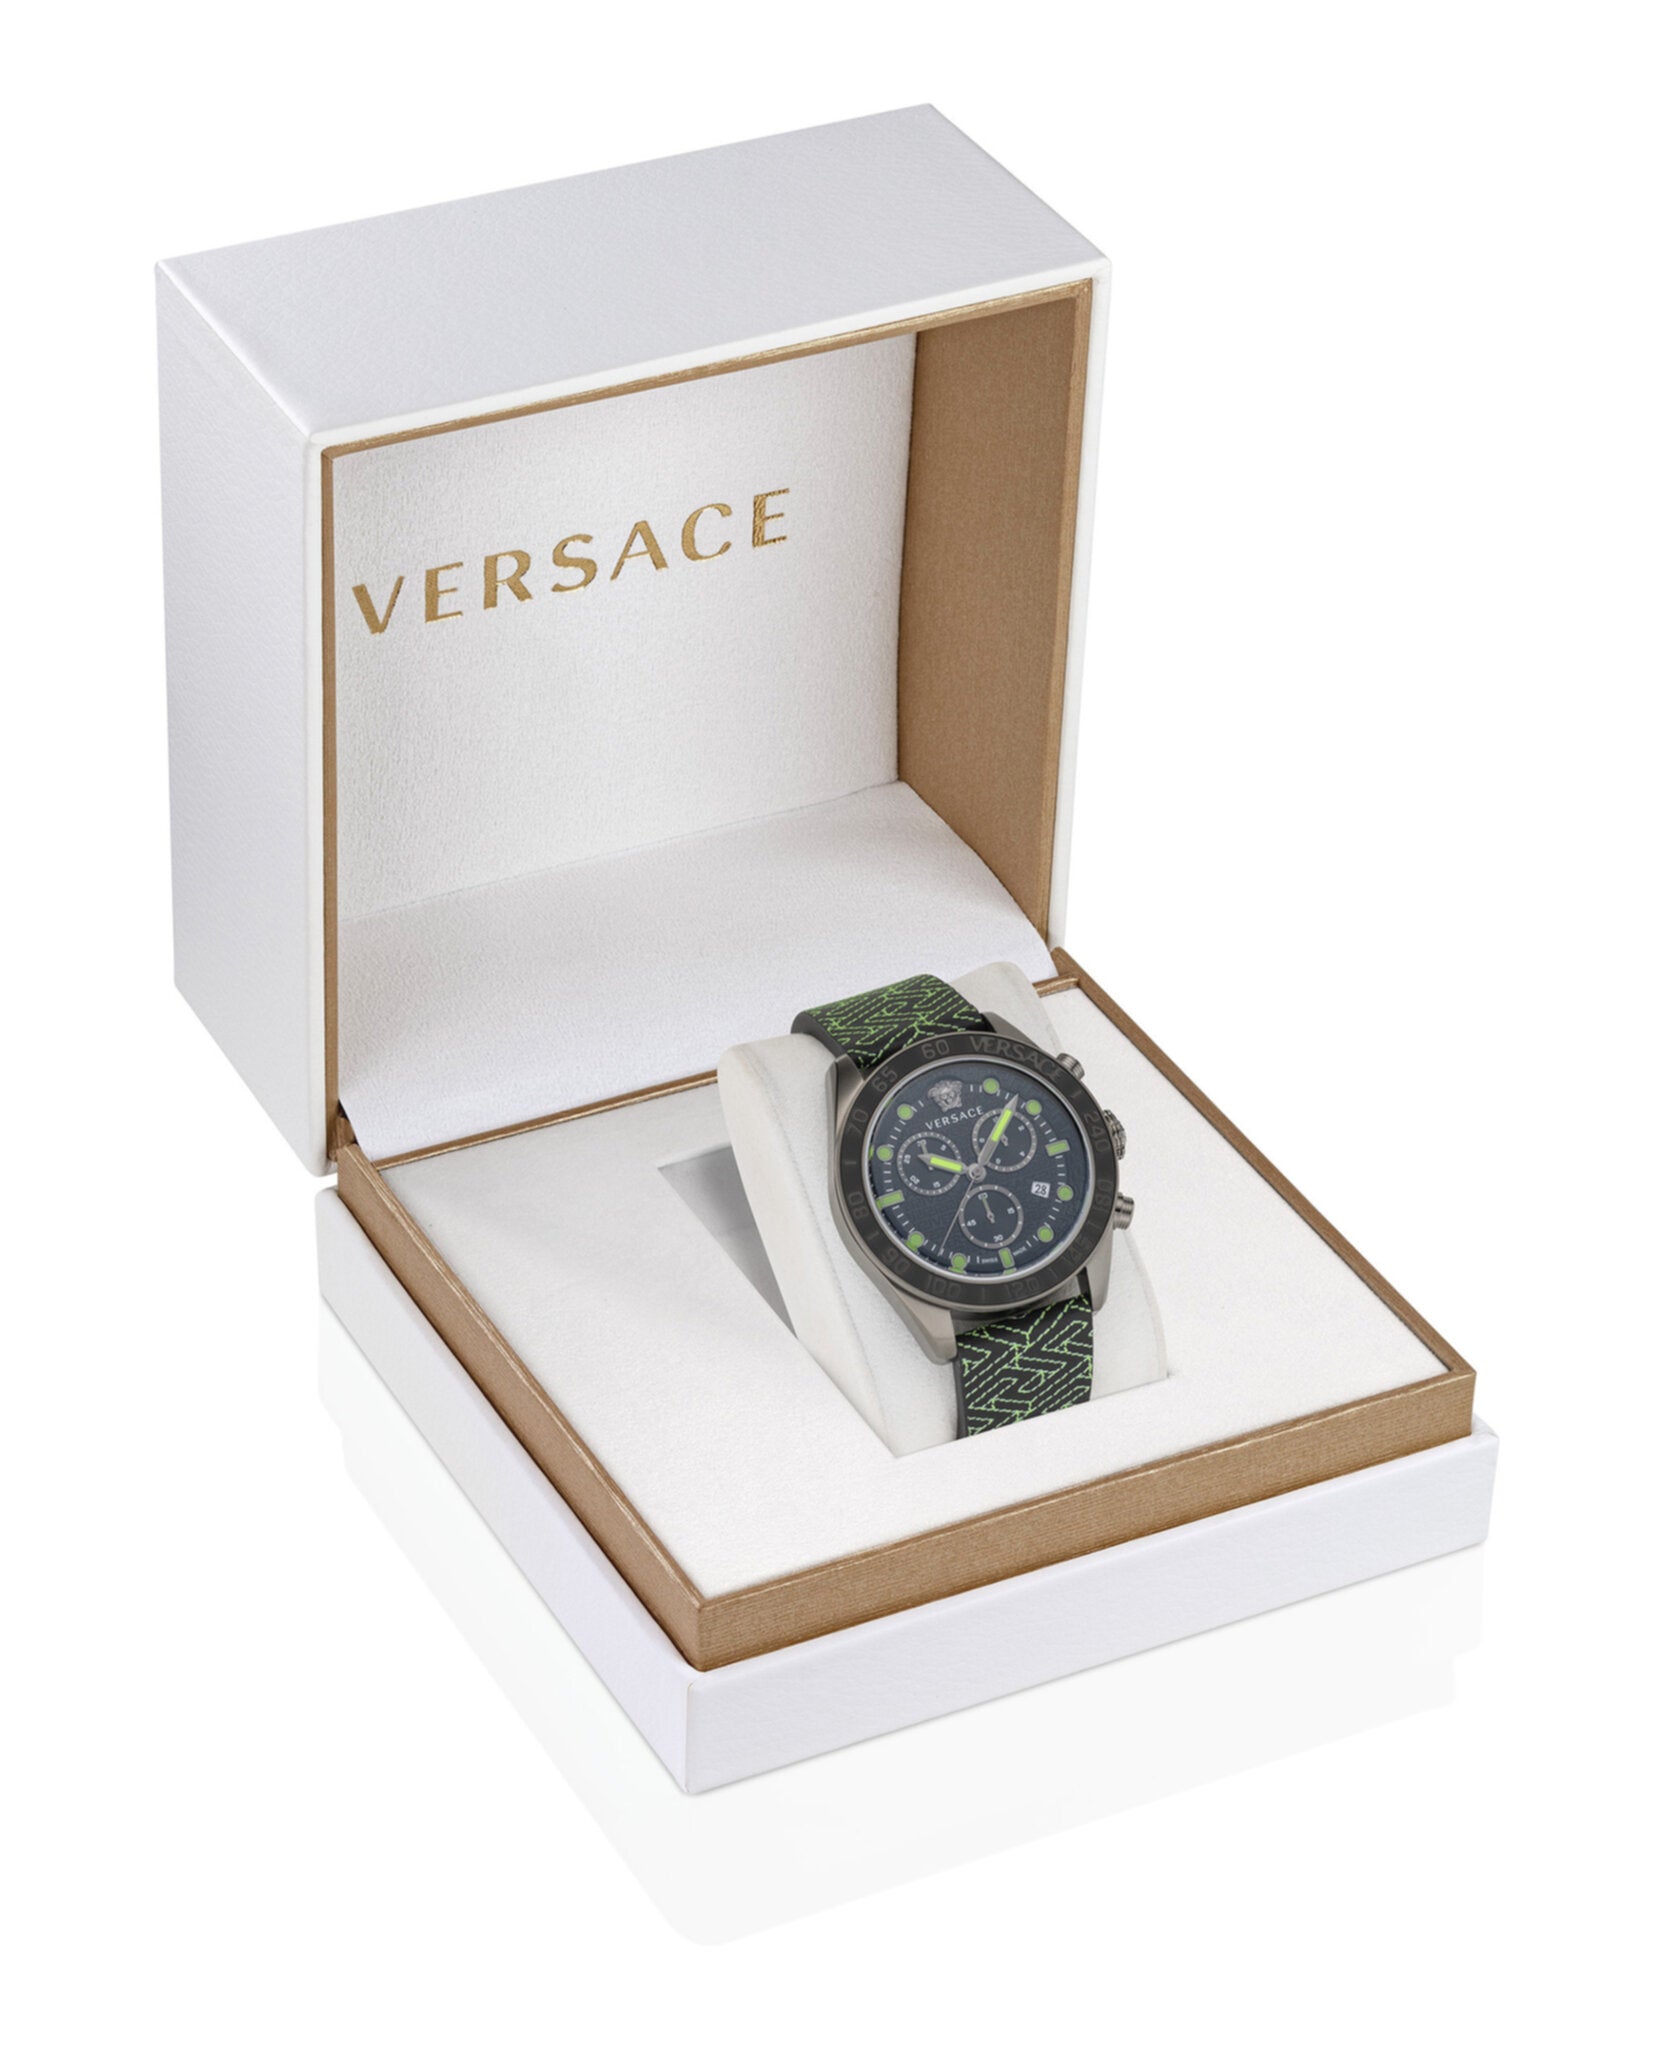 Versace Mens Greca Dome Watches | MadaLuxe Time – Madaluxe Time